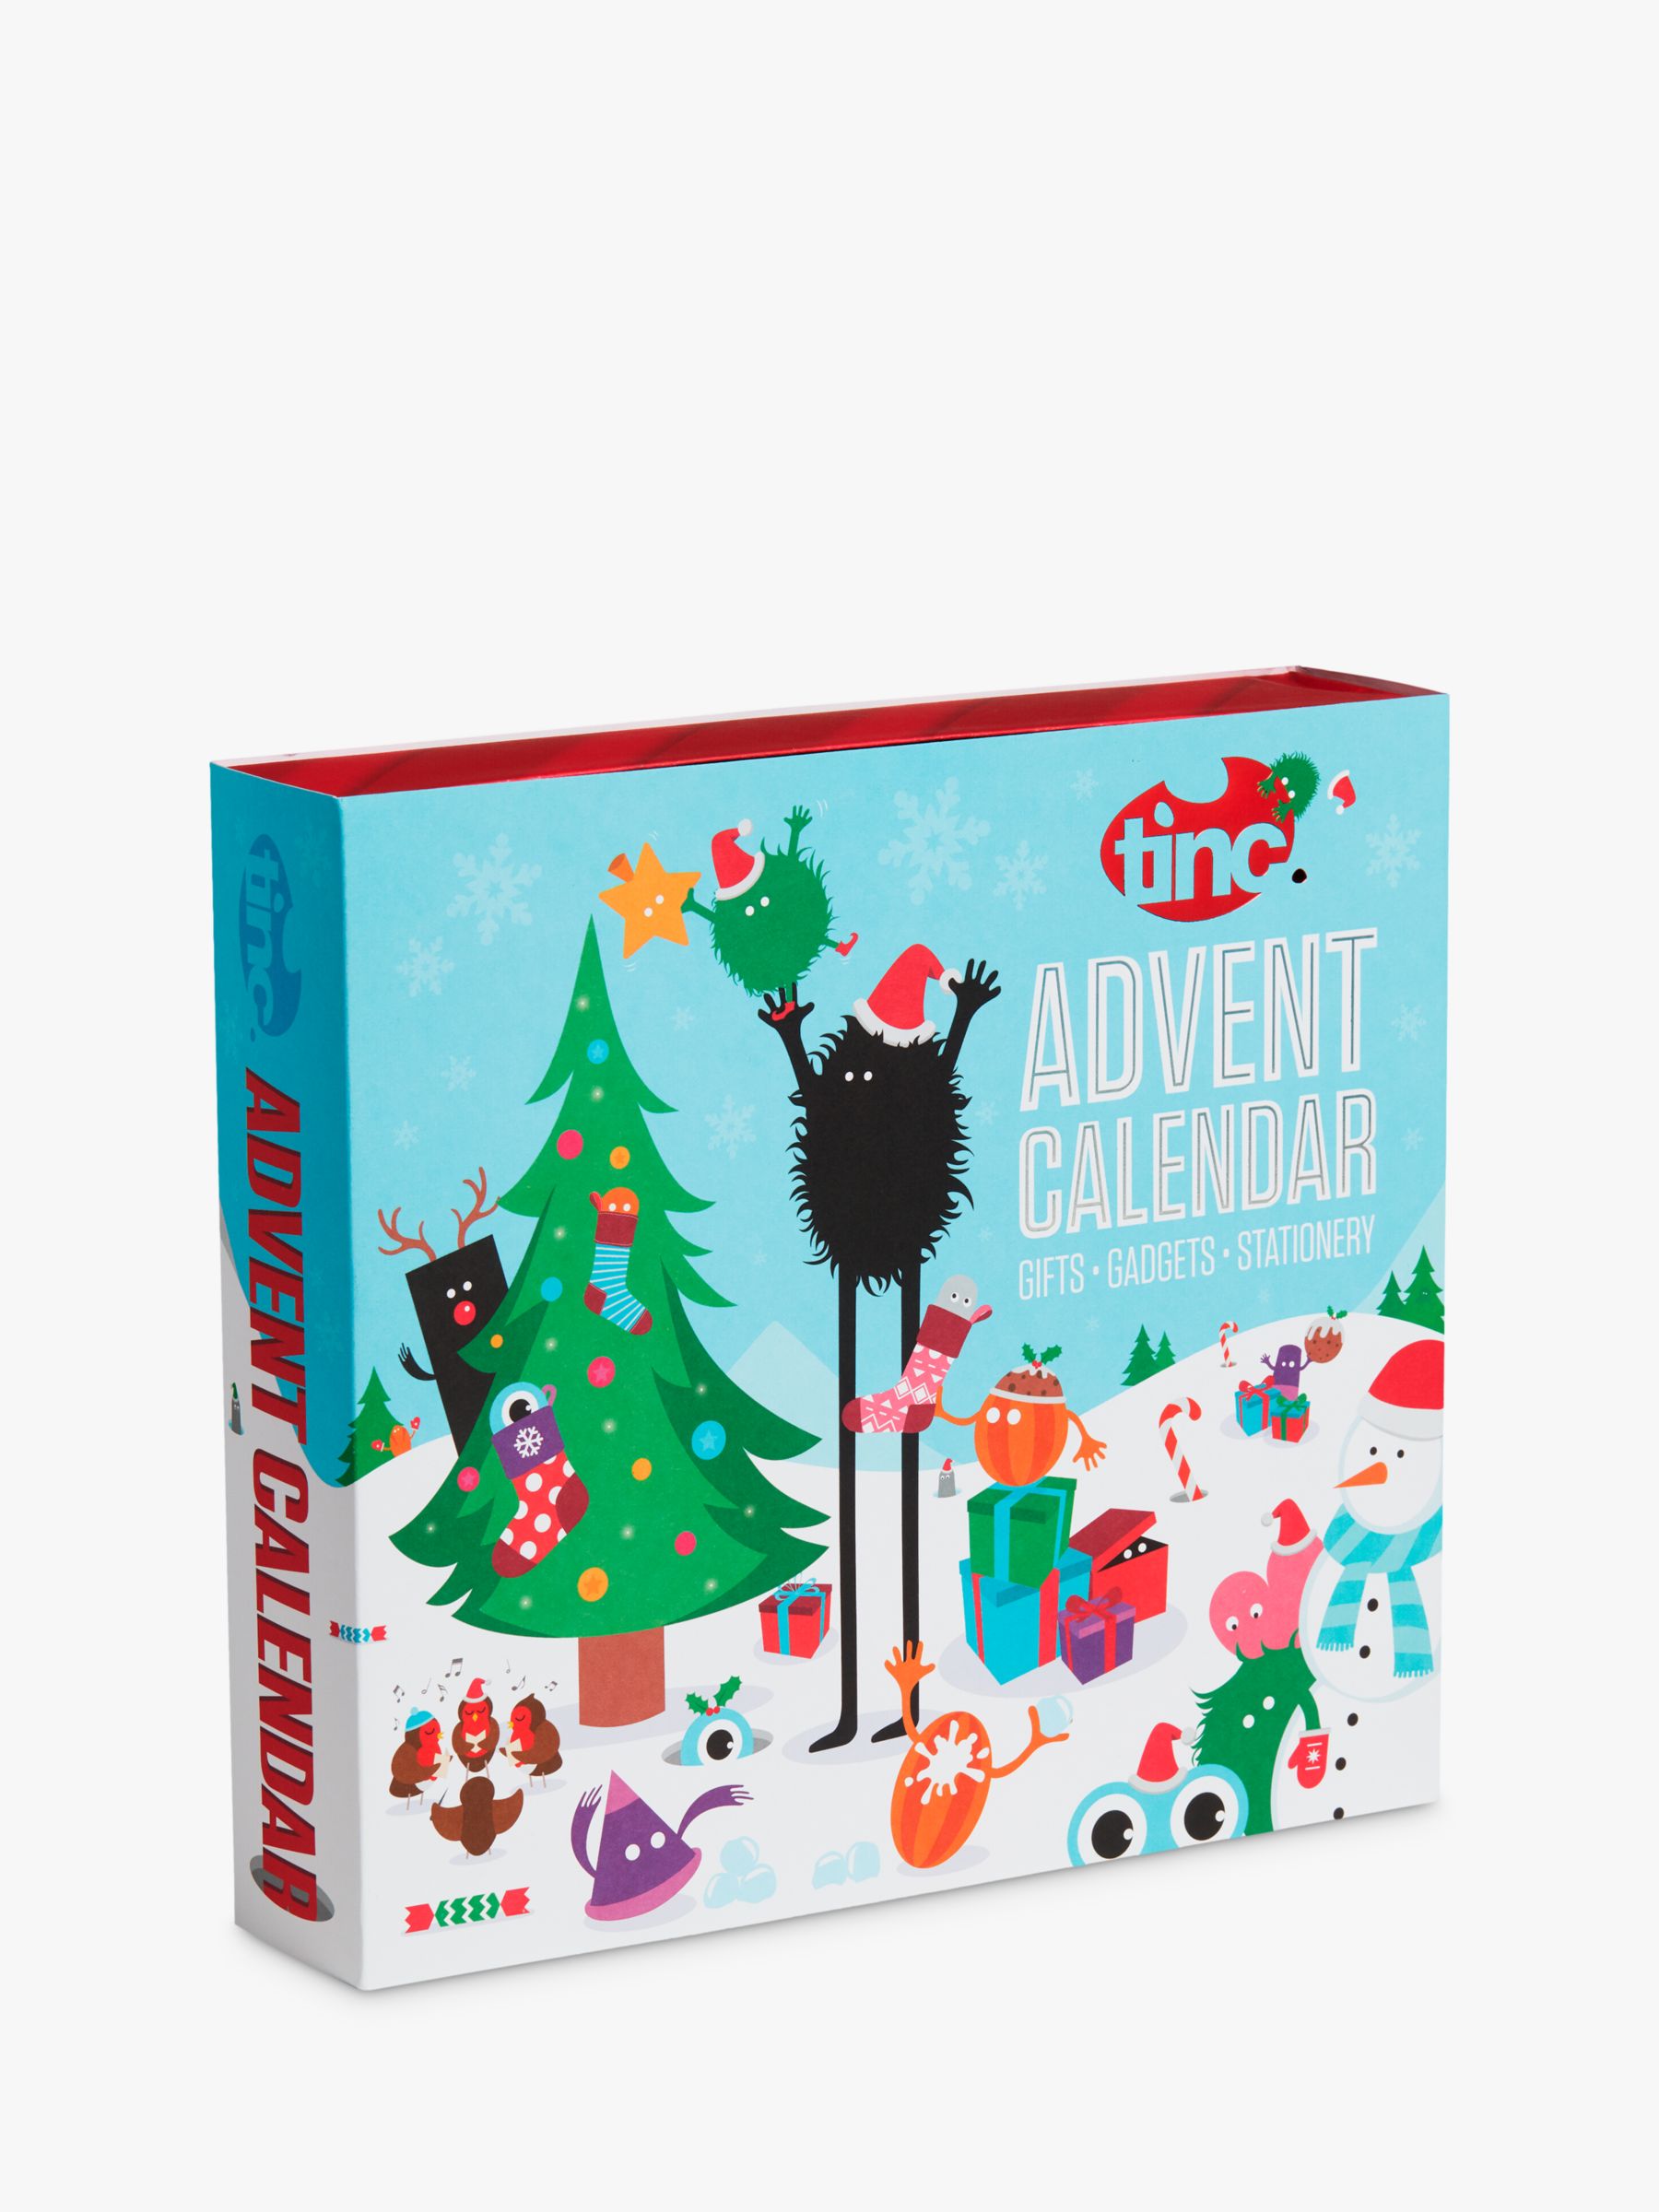 Tinc Children's Gifts, Gadgets & Stationery Advent Calendar 2020 at